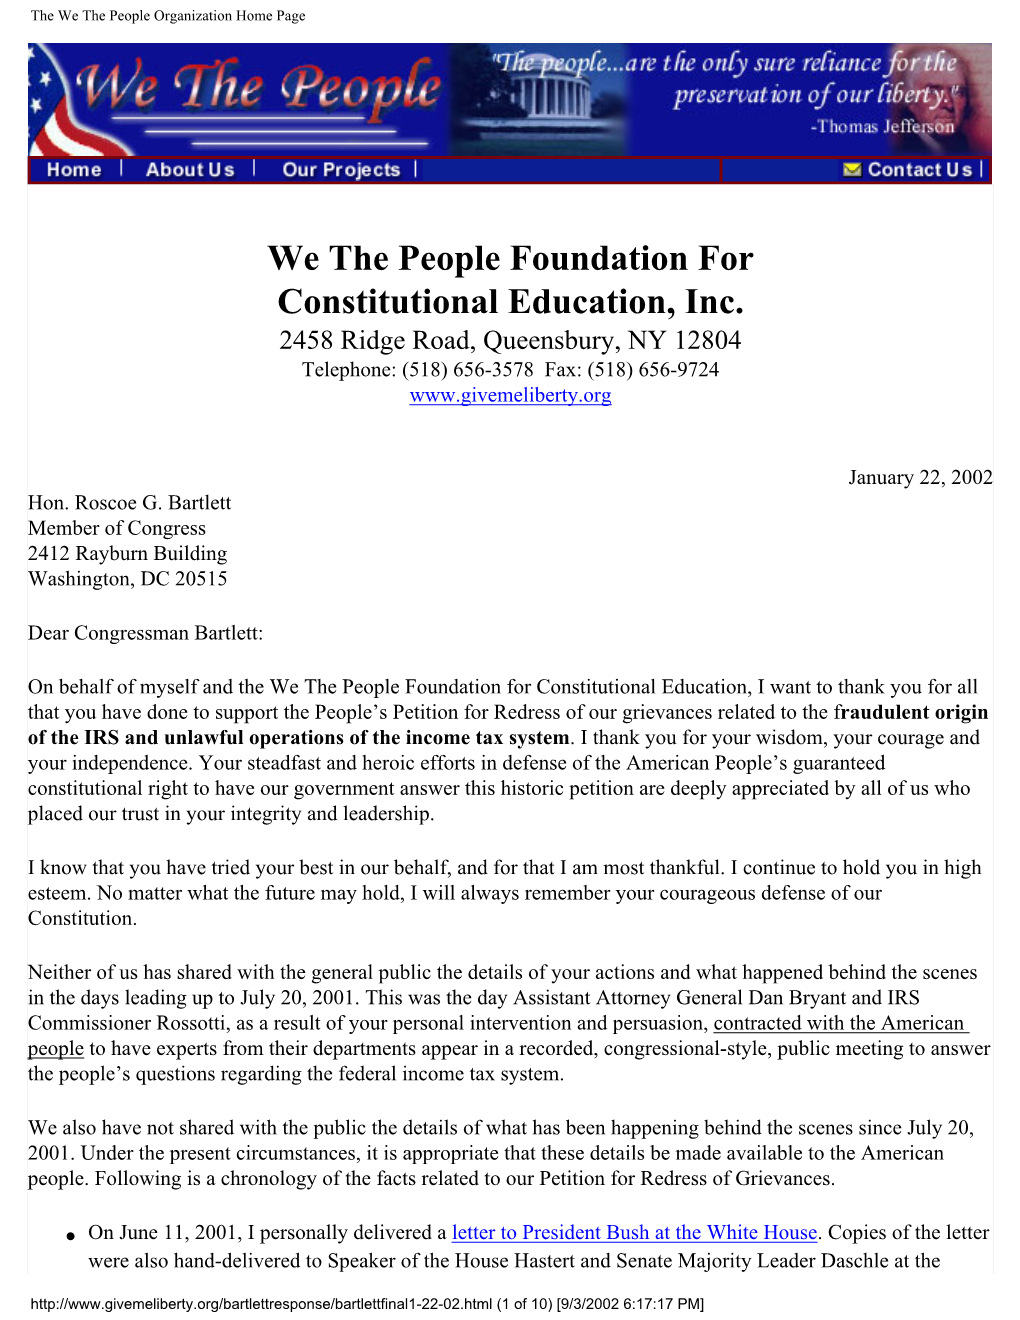 We the People Response to Rep. Bartlett